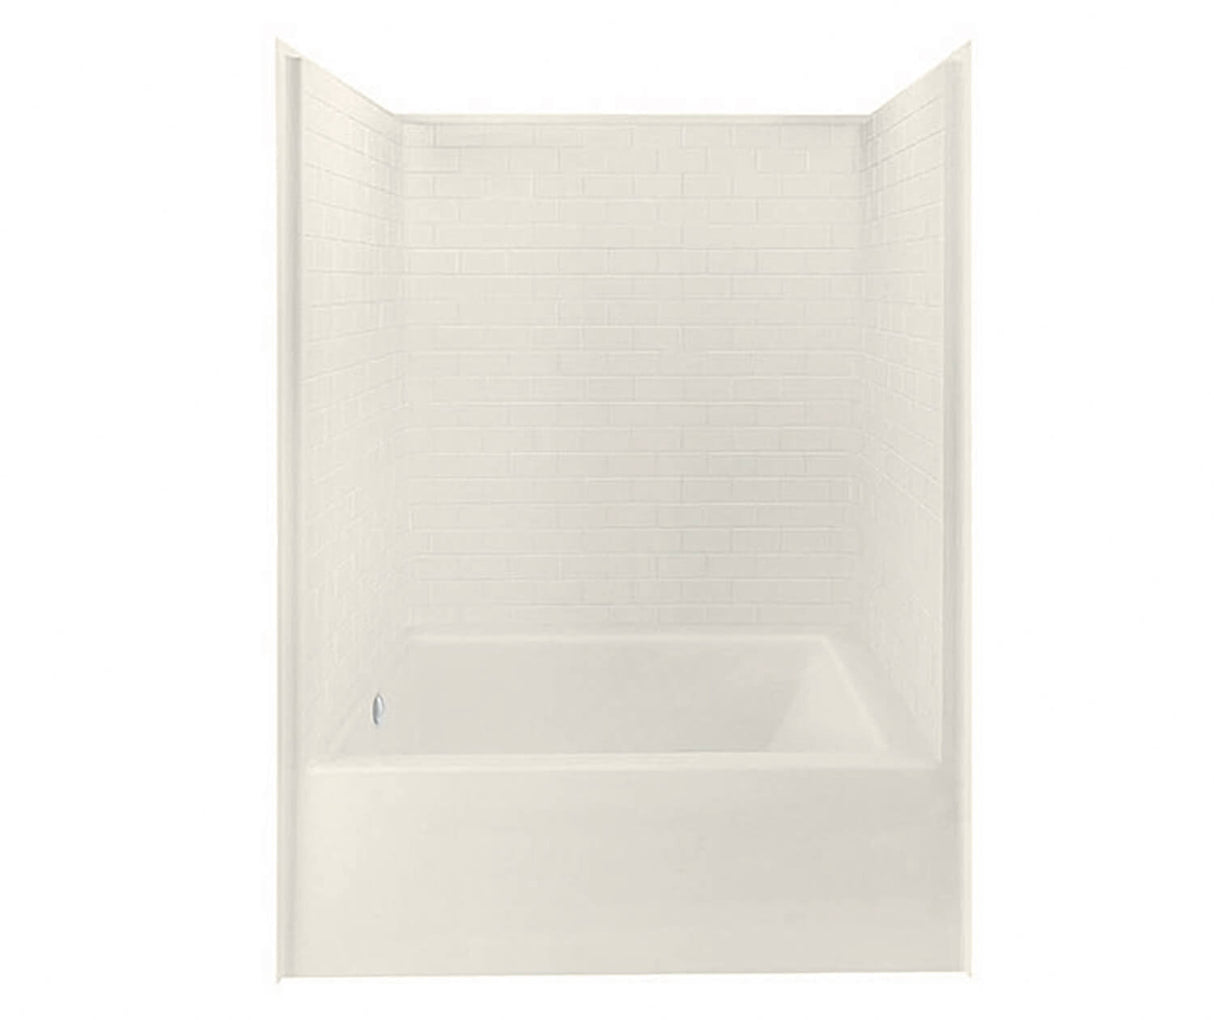 Aker 6042STT AcrylX Alcove Right-Hand Drain One-Piece Tub Shower in Biscuit